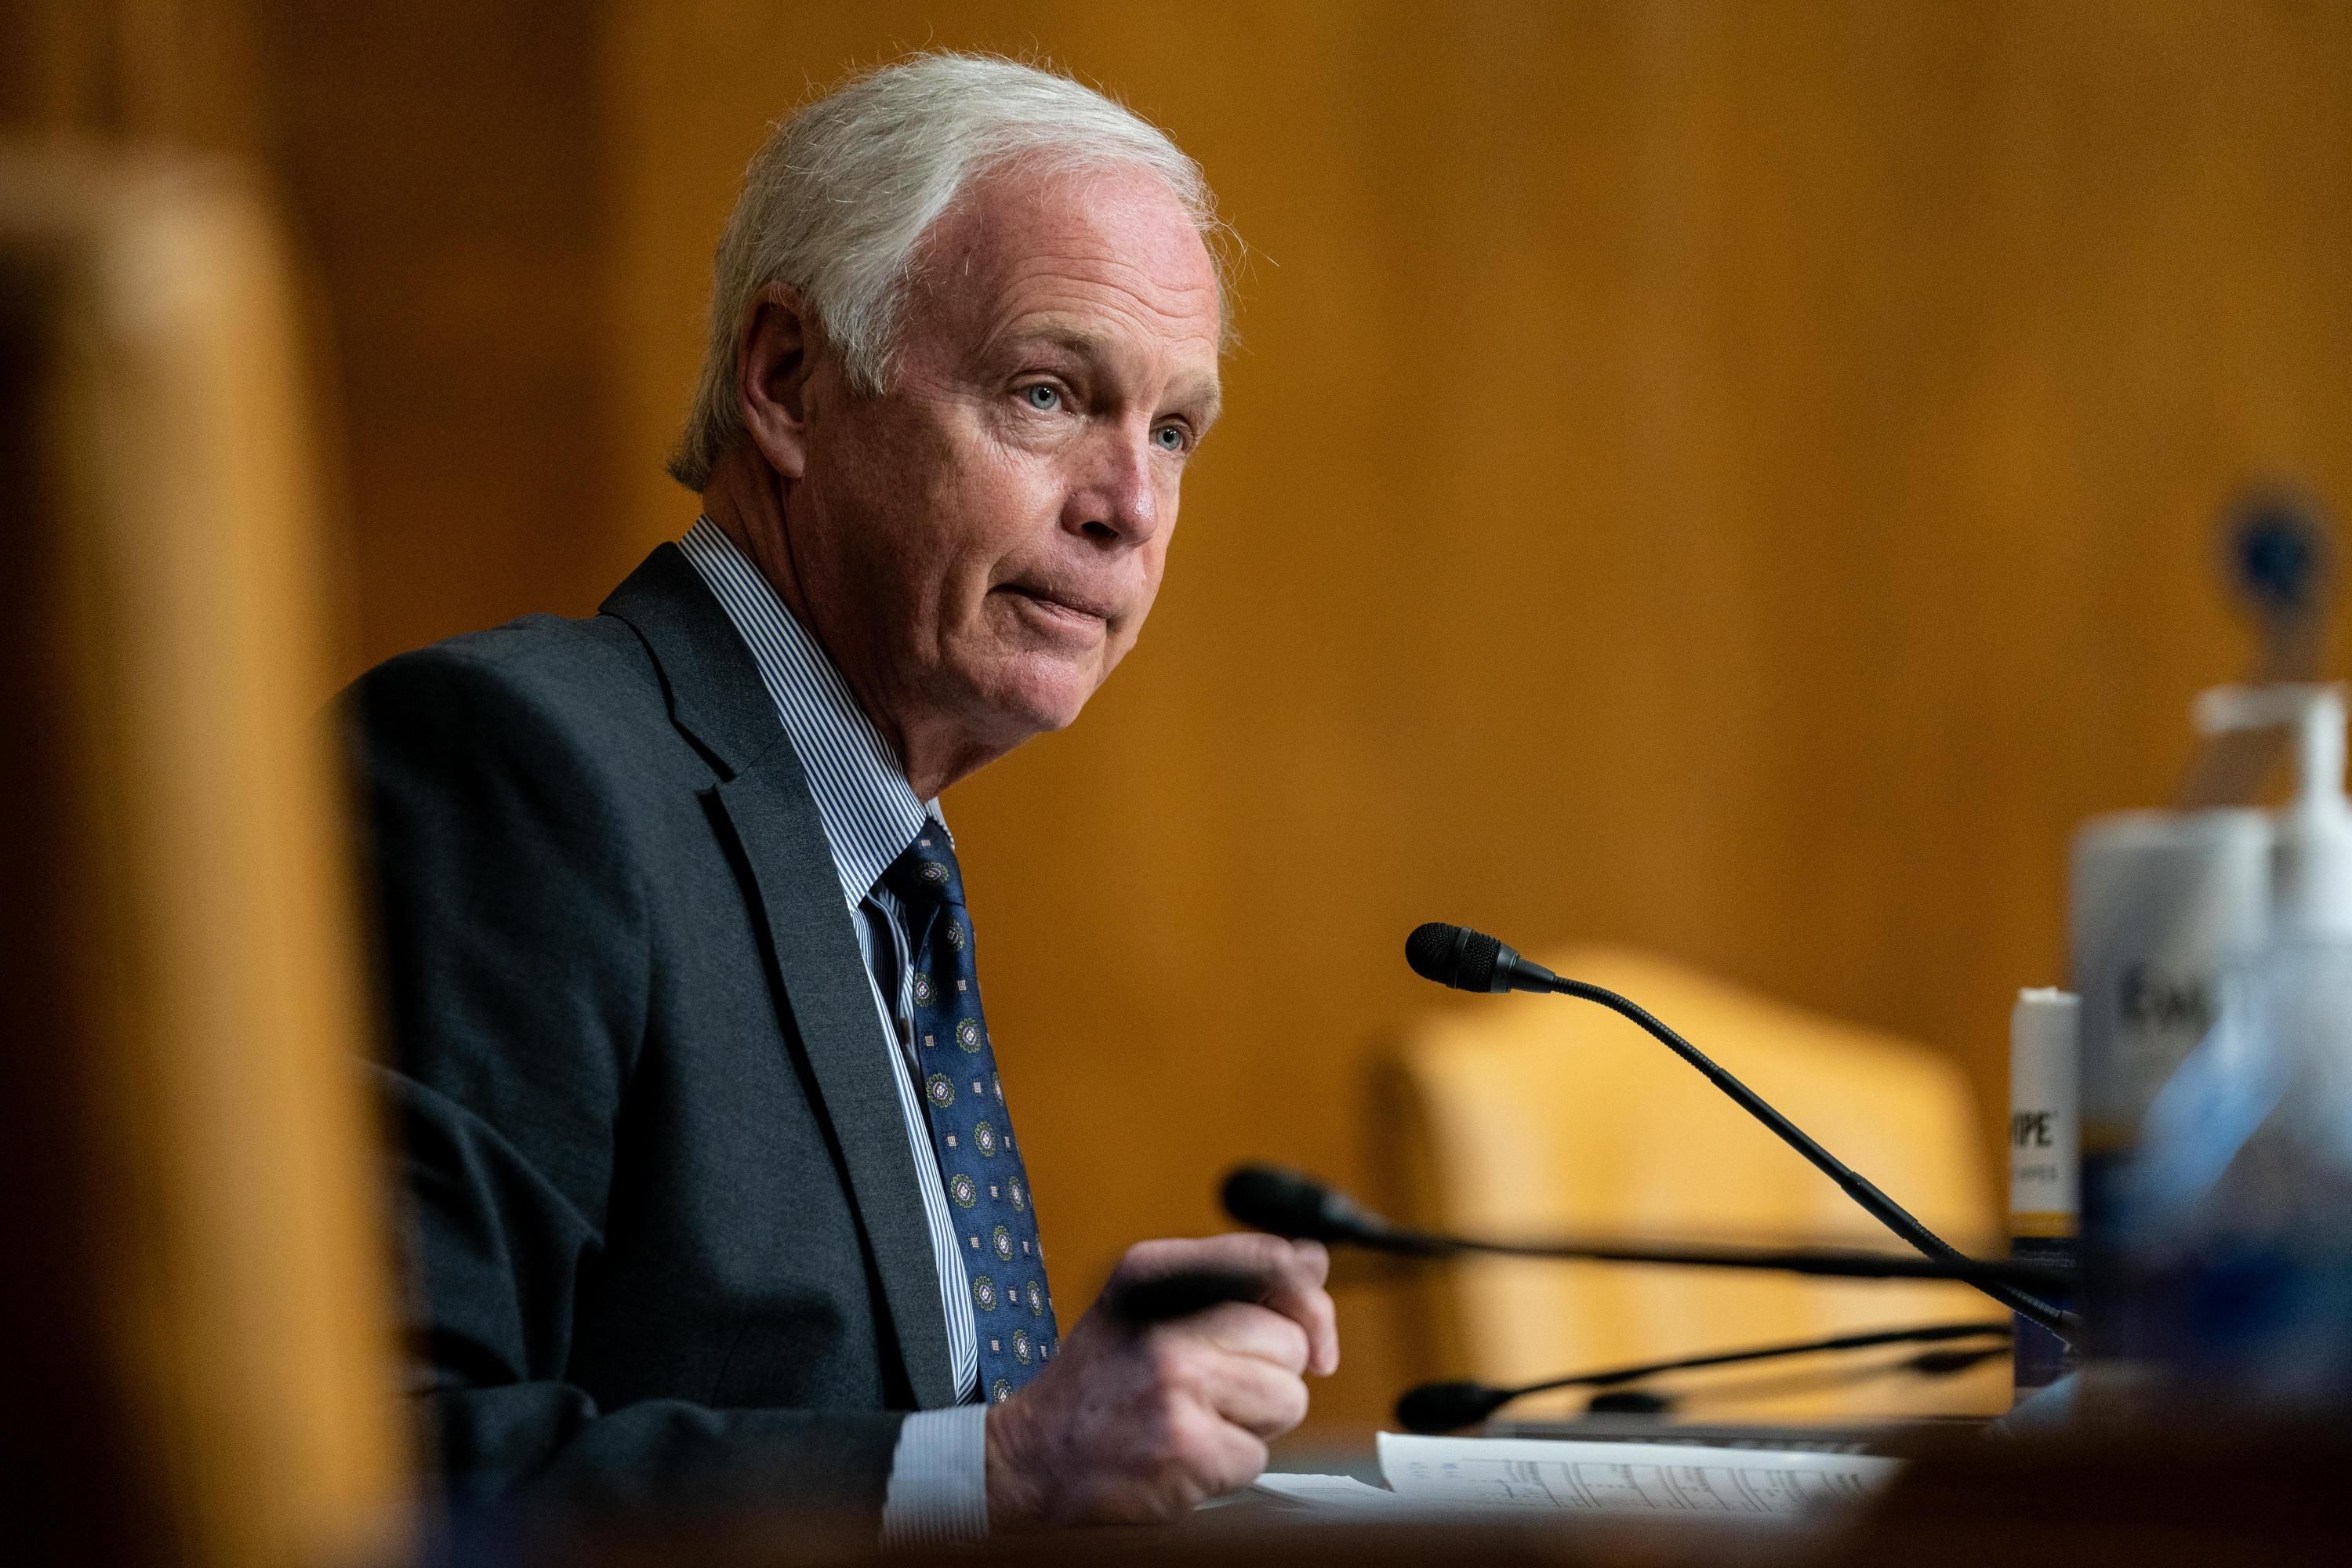 Sen. Ron Johnson speaks at a congressional hearing